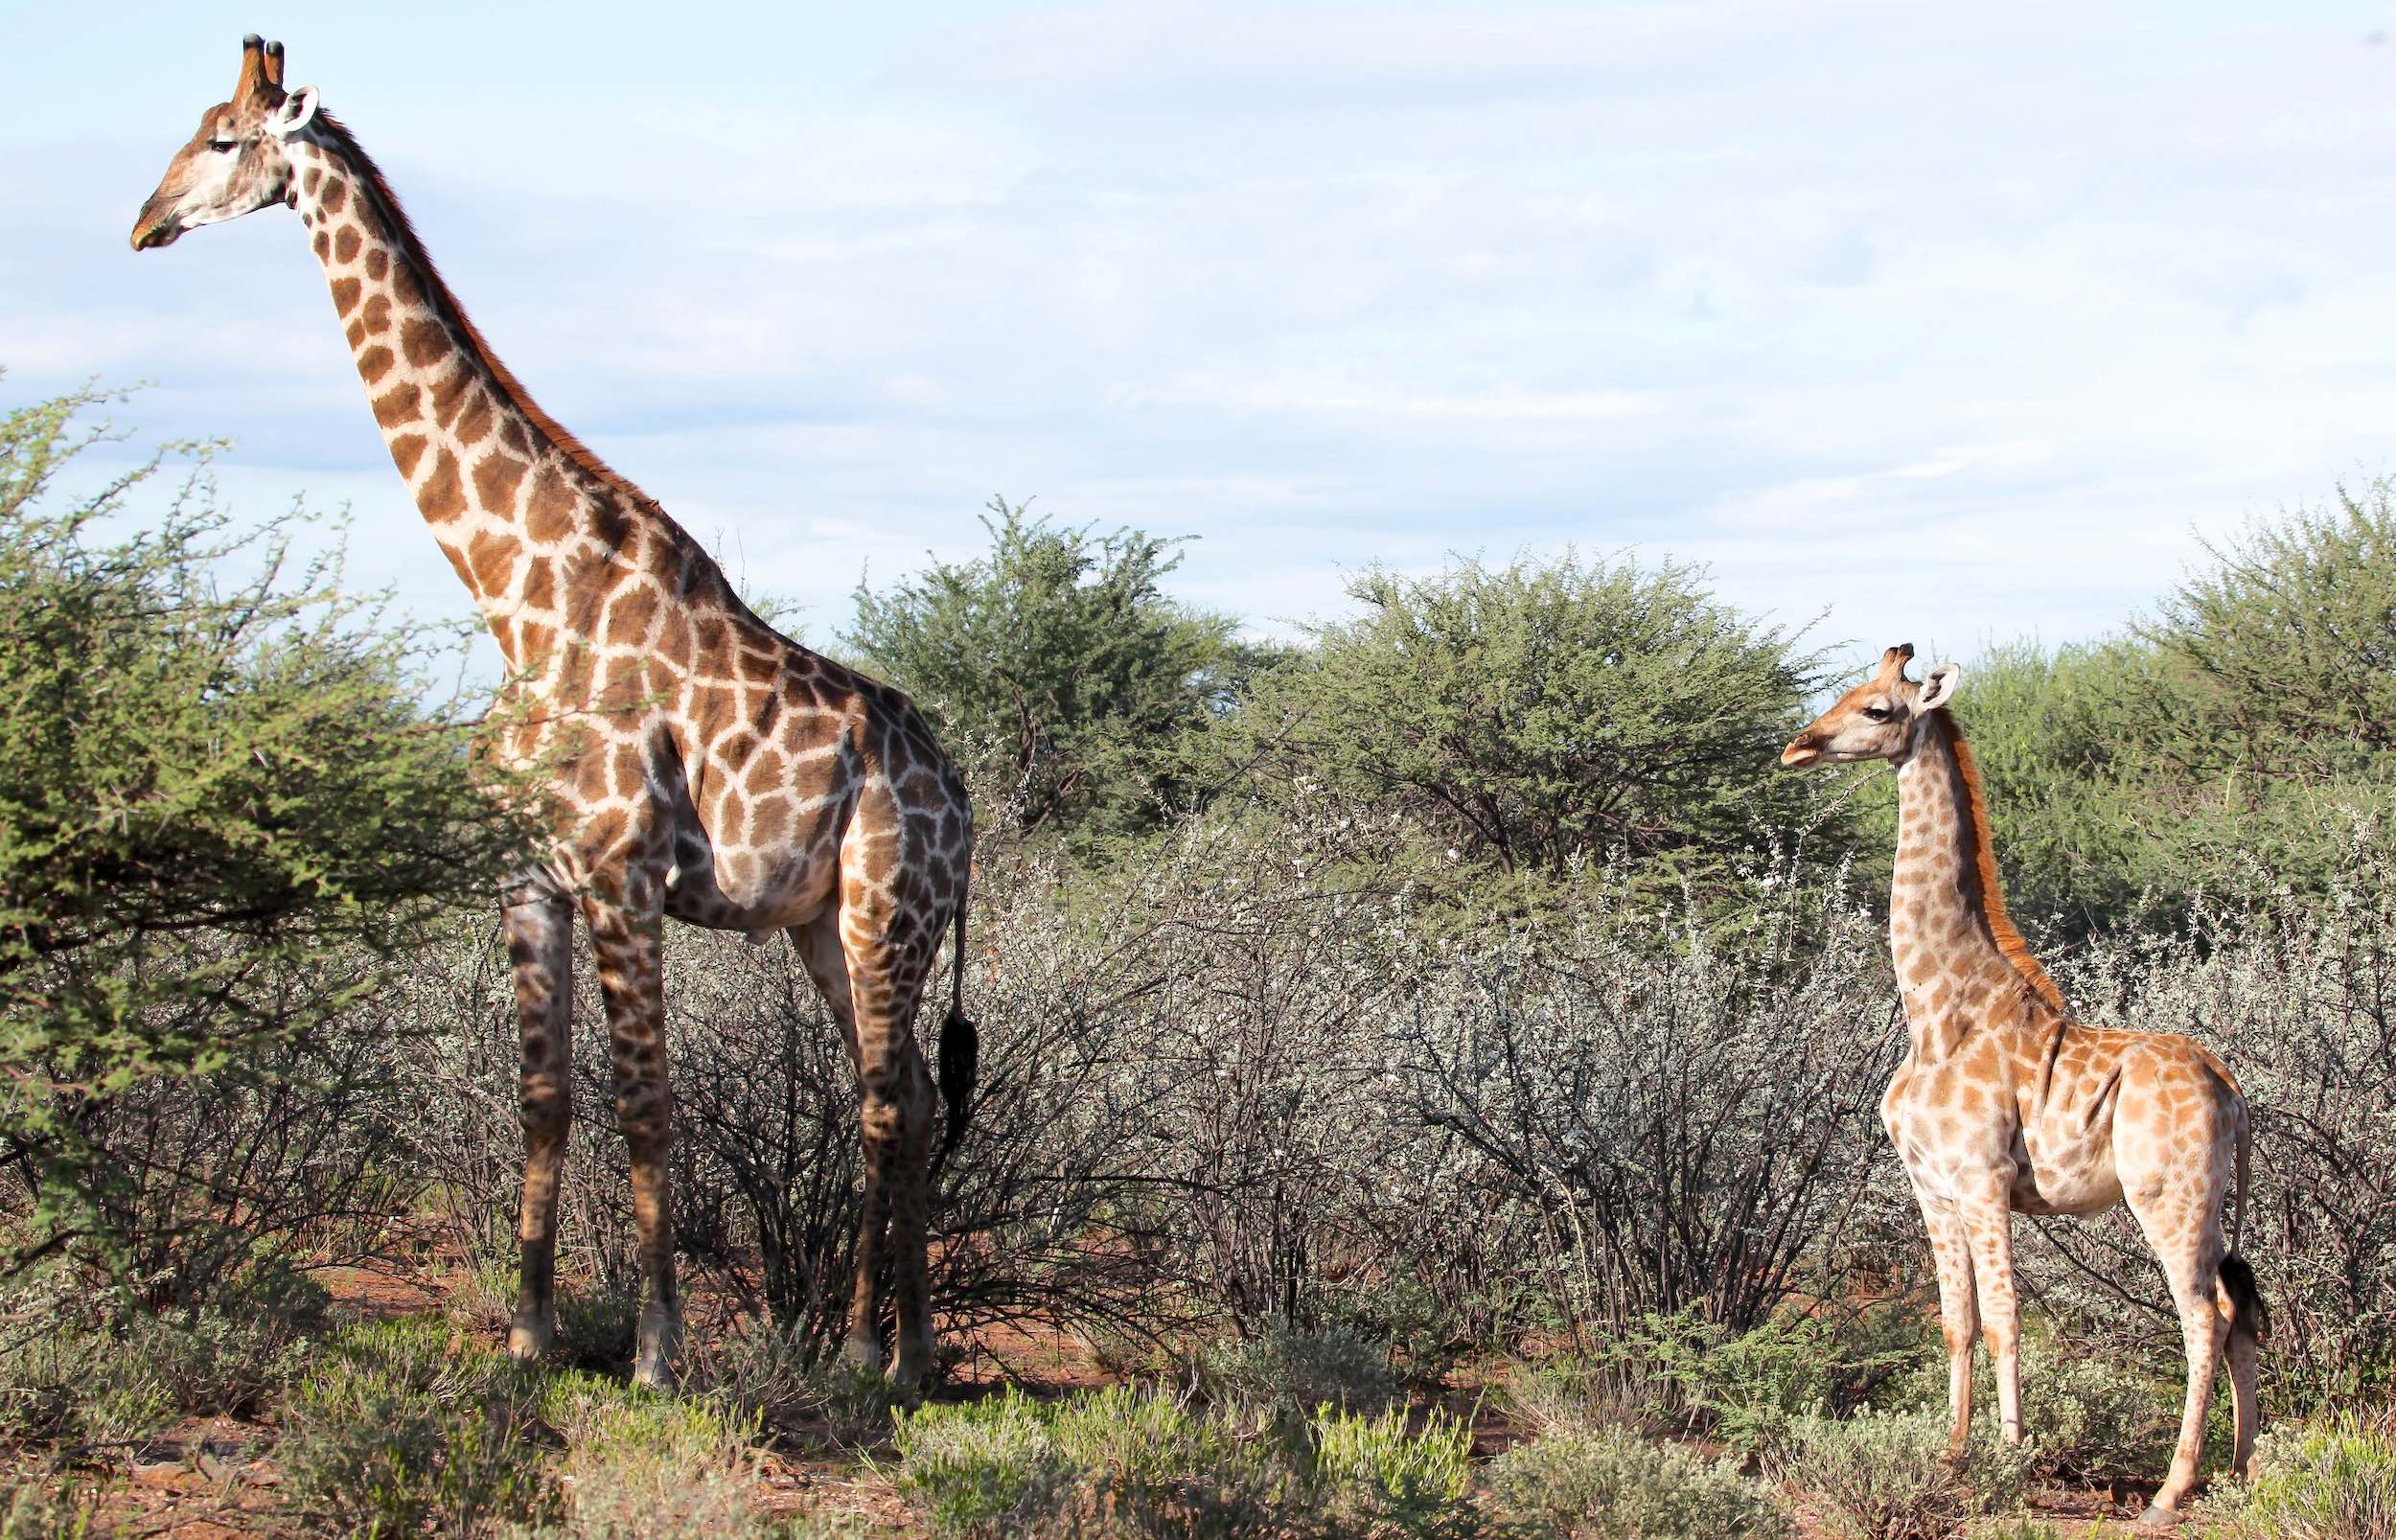 A distinctly stunted looking dwarf giraffe stands next to an adult.